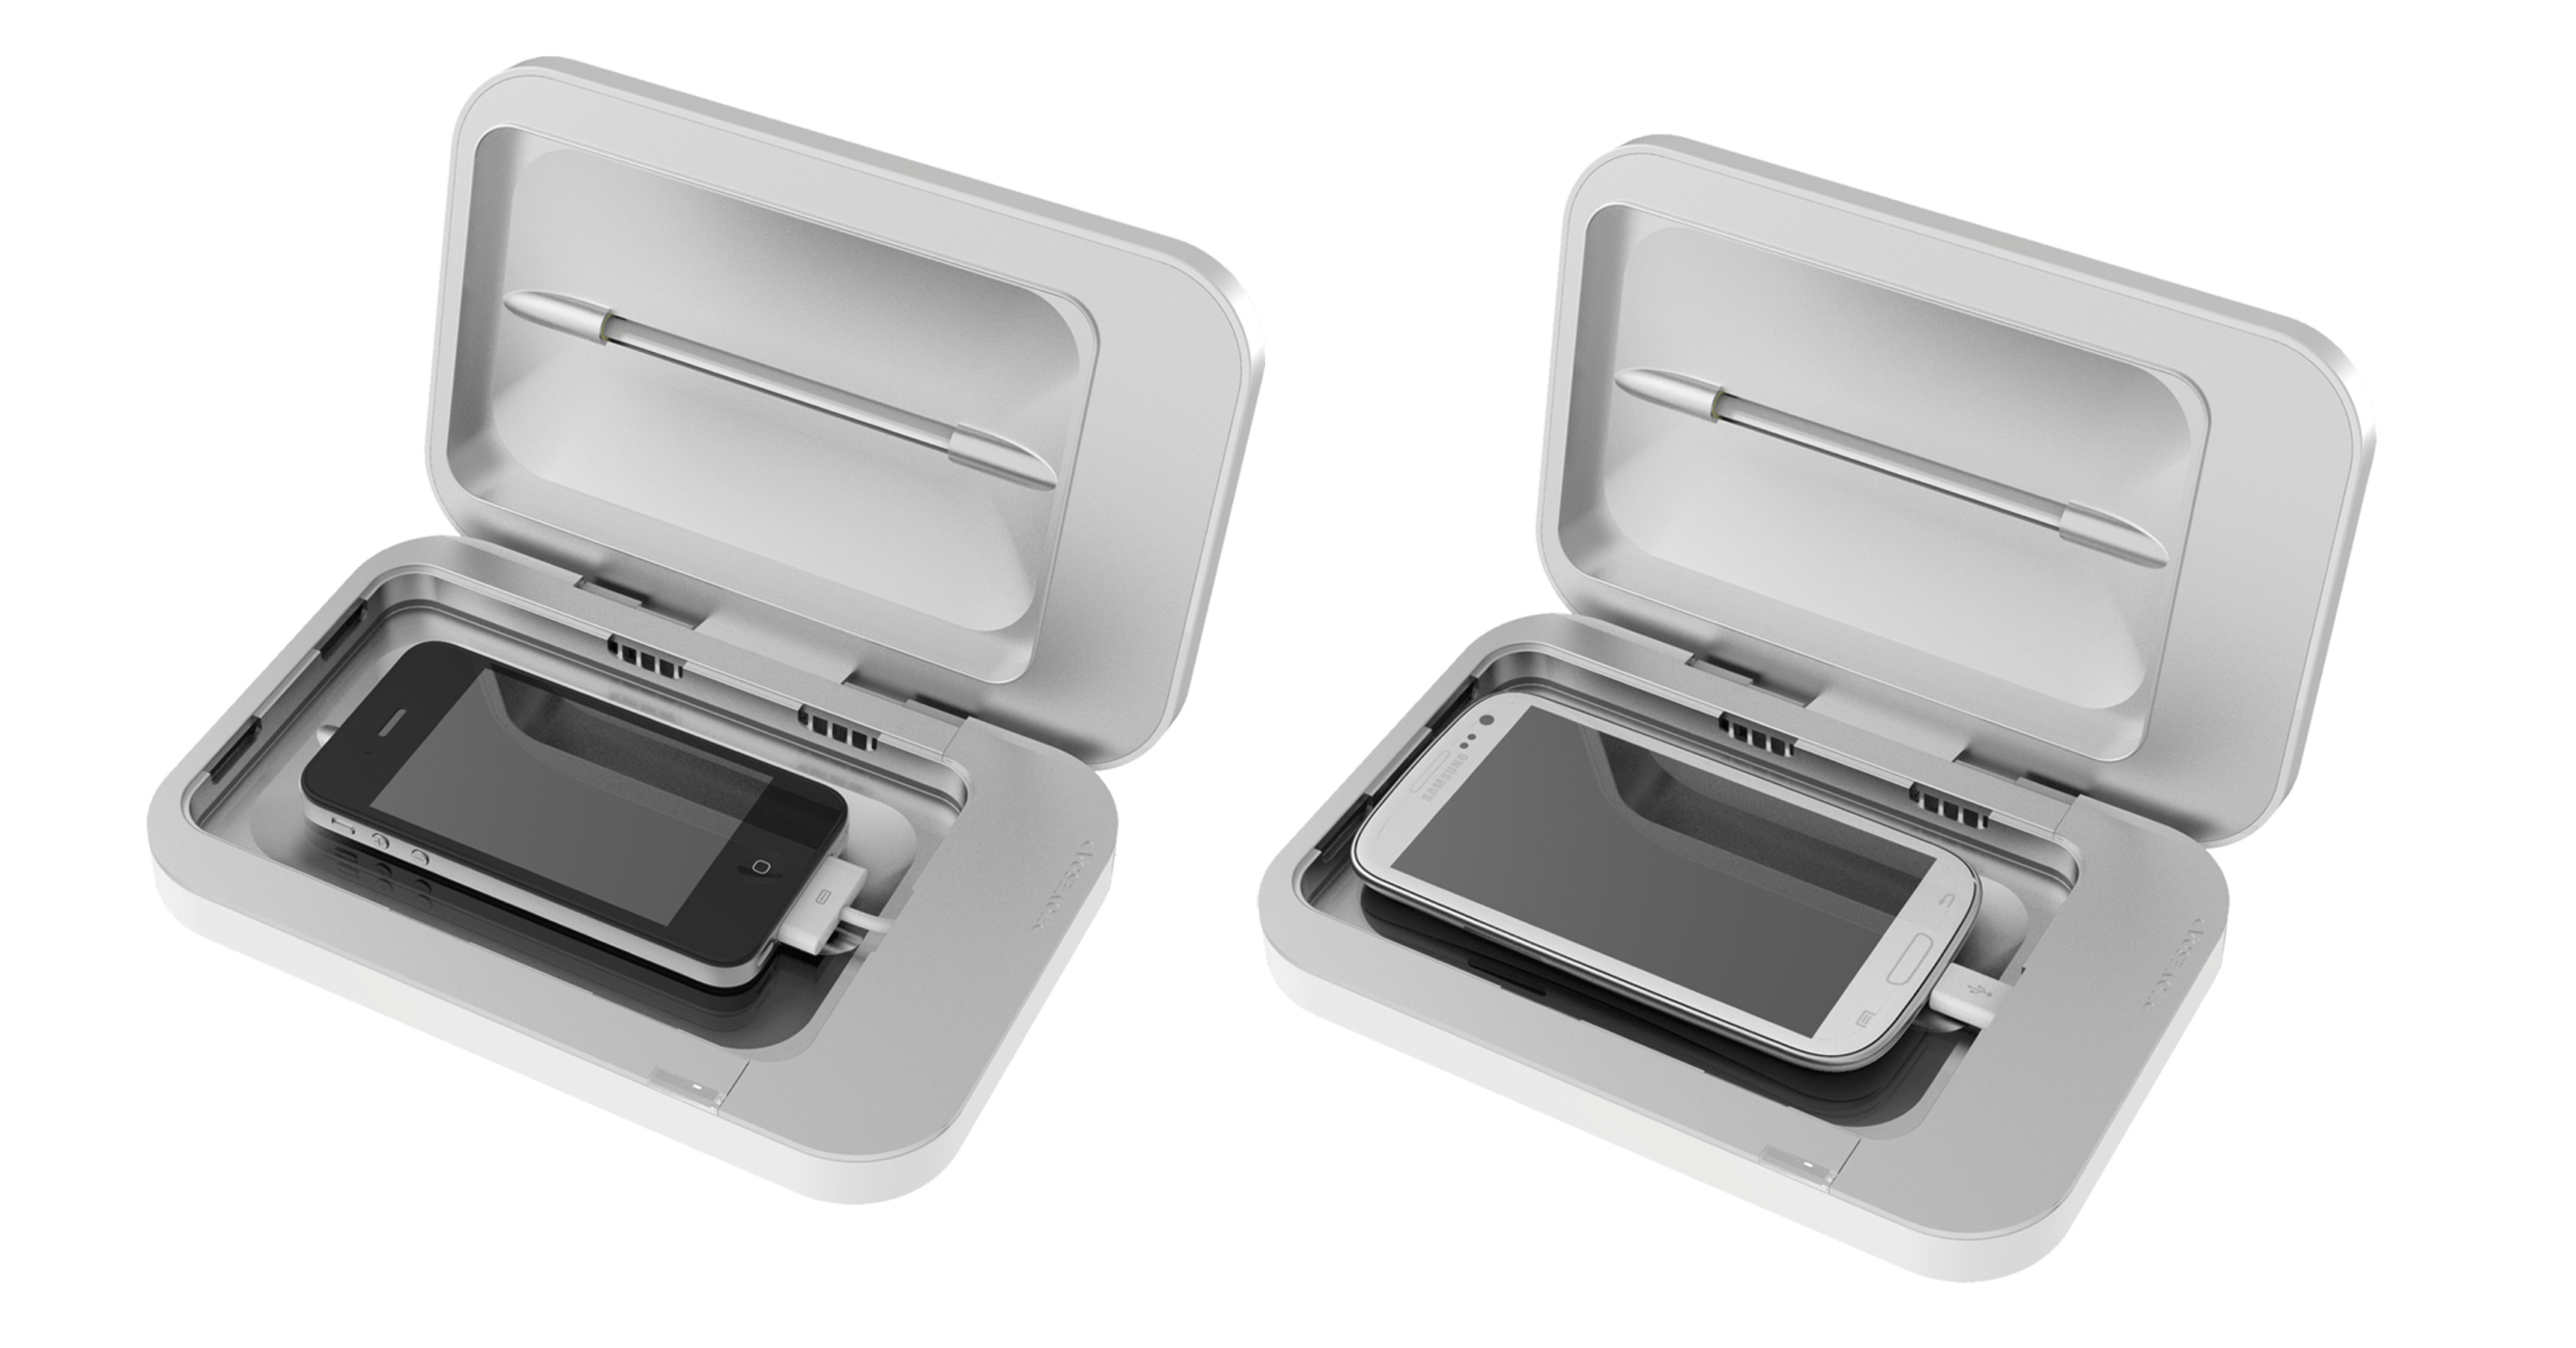 Geek insider, geekinsider, geekinsider. Com,, kill the germs and bacteria on your phone with phonesoap, uncategorized